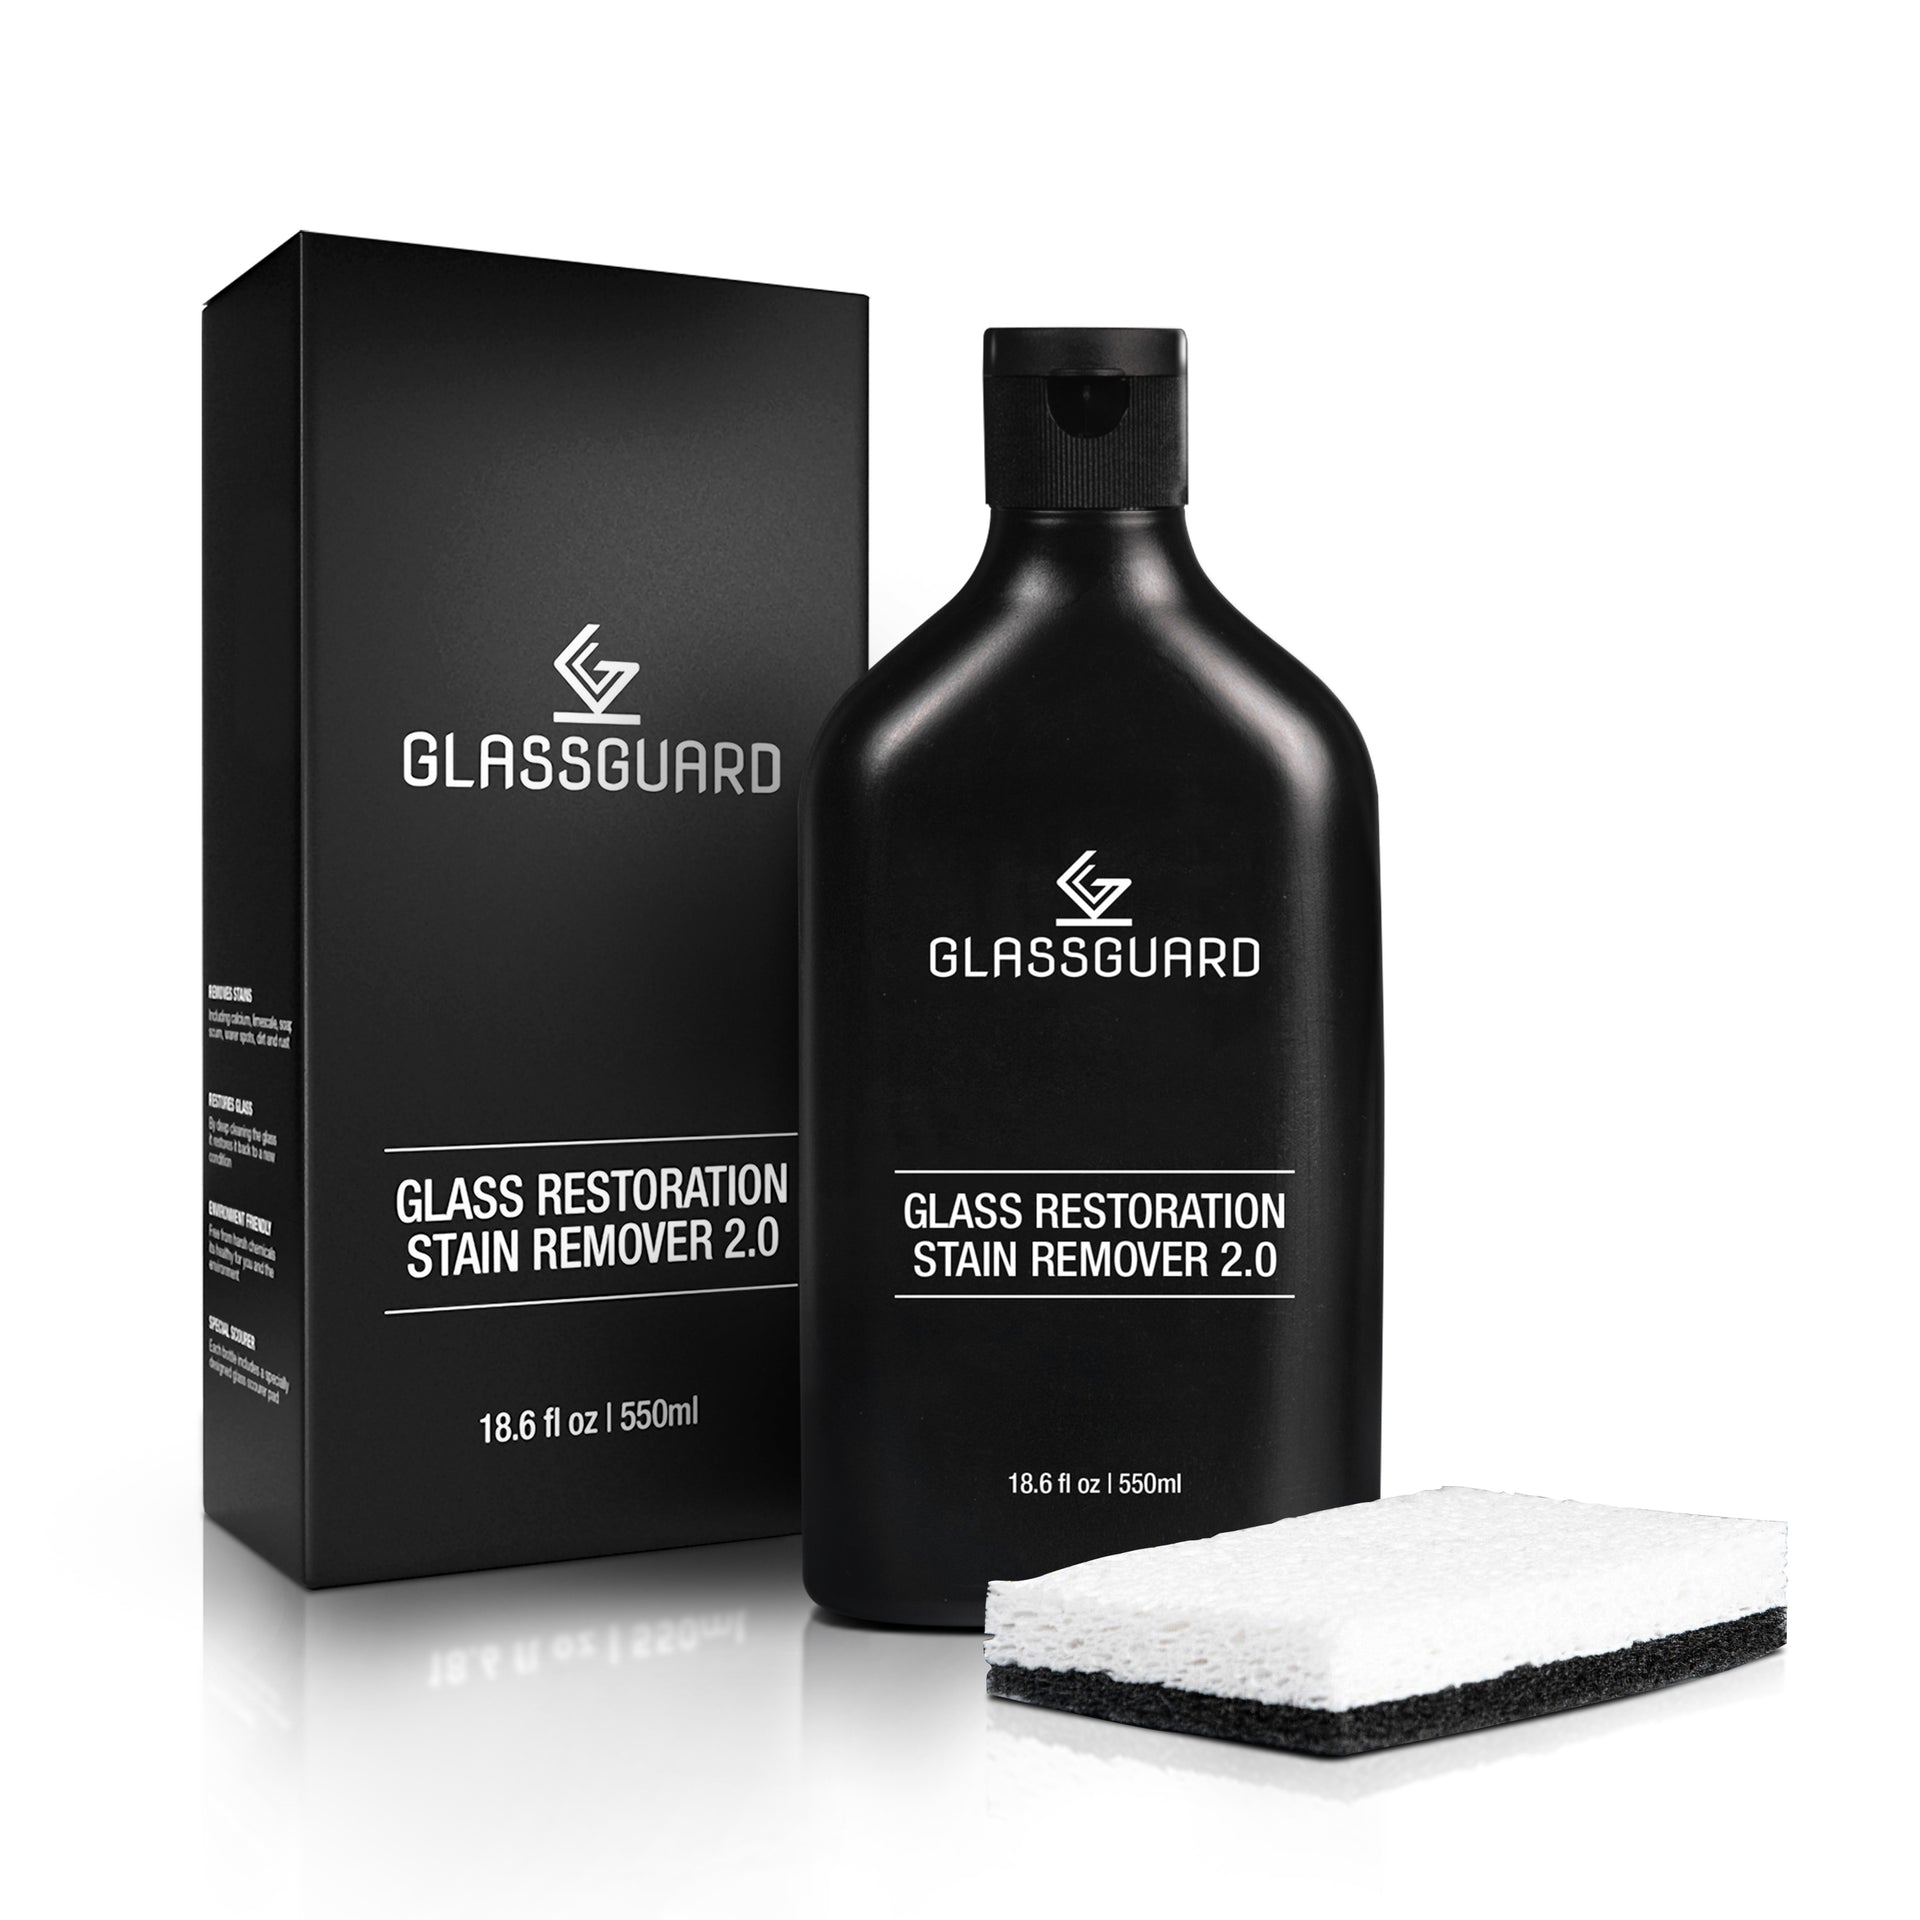 GLASSGUARD Glass Restoration Stain Remover is the best glass cleaner. Use as a glass, shower screen, or window cleaner for hard water stains